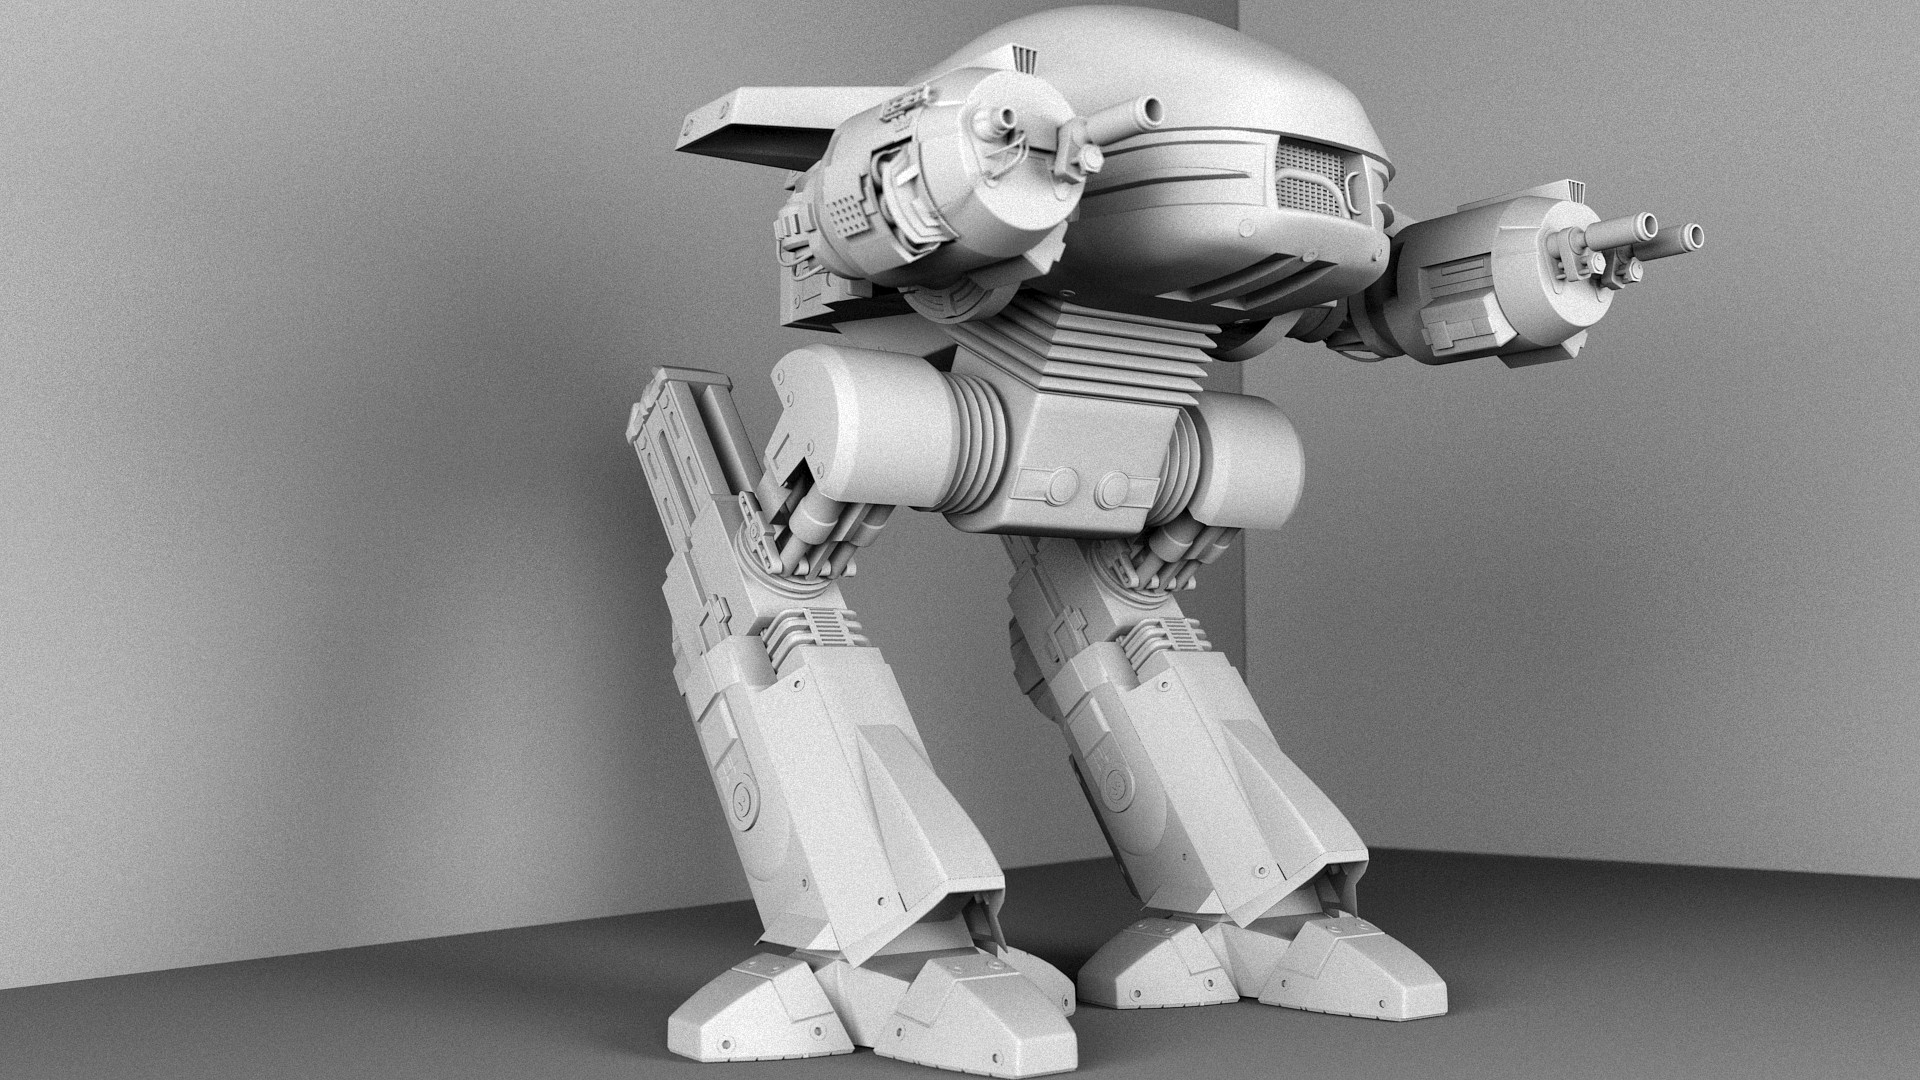 Ed 209 from Robocop movie Modelled with 3DS Max. 